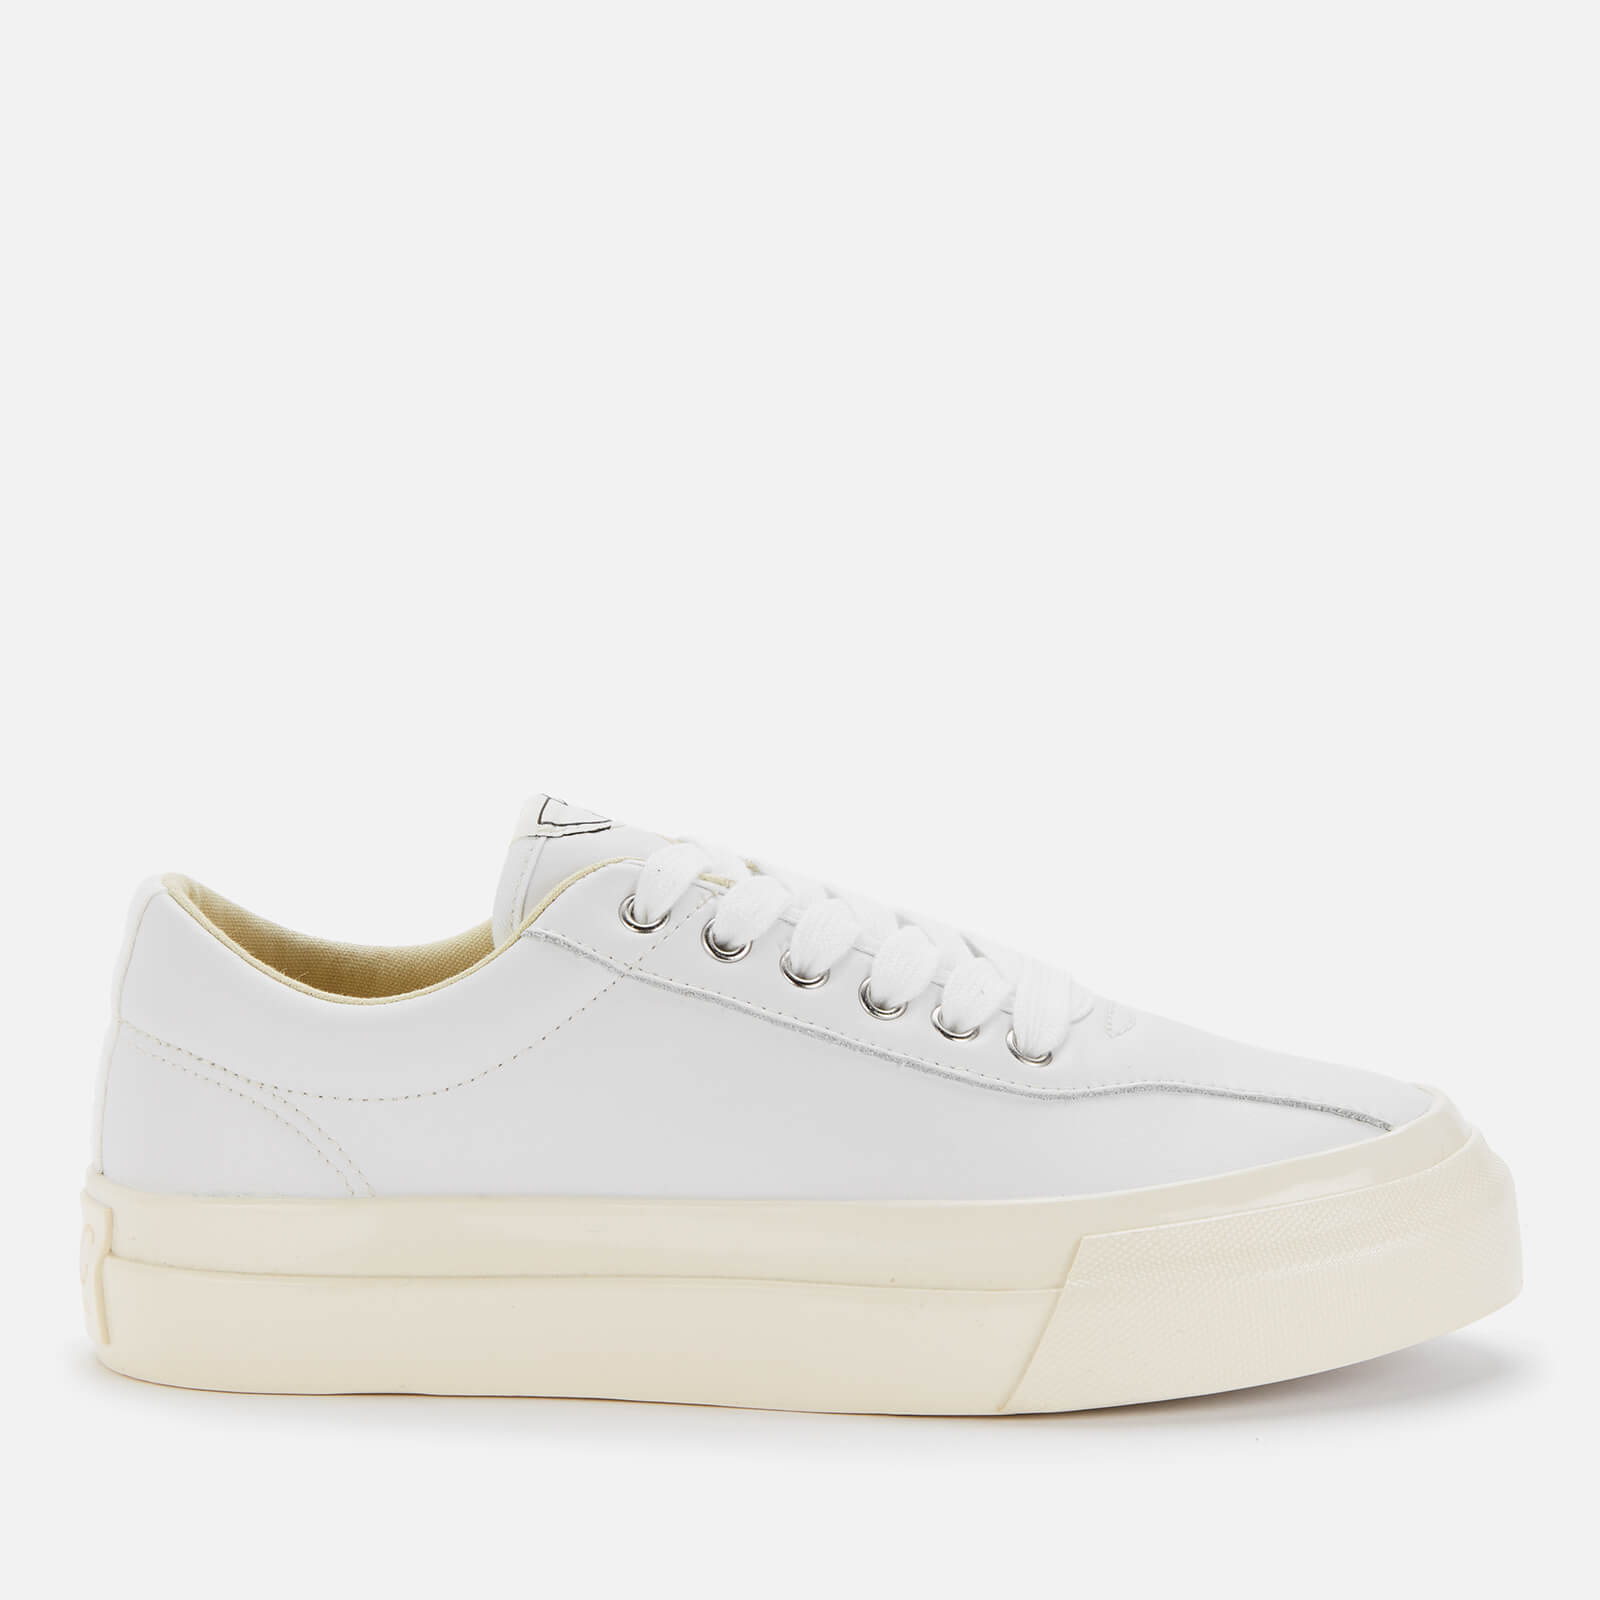 Stepney Workers Club Dellow Leather Low Top Trainers - White - EU 36